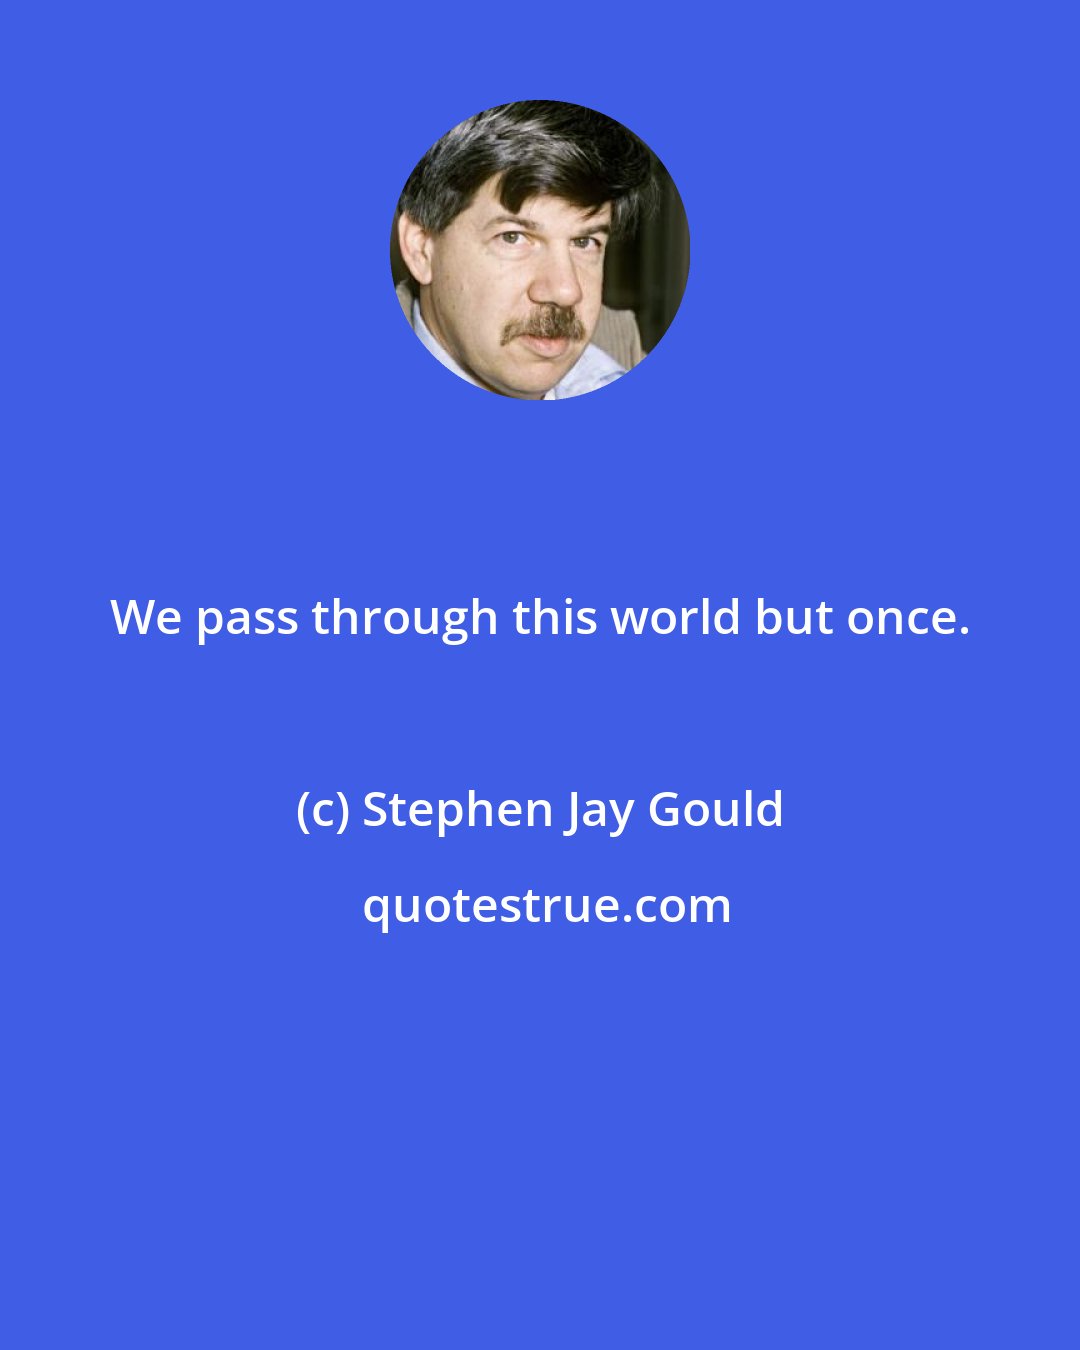 Stephen Jay Gould: We pass through this world but once.